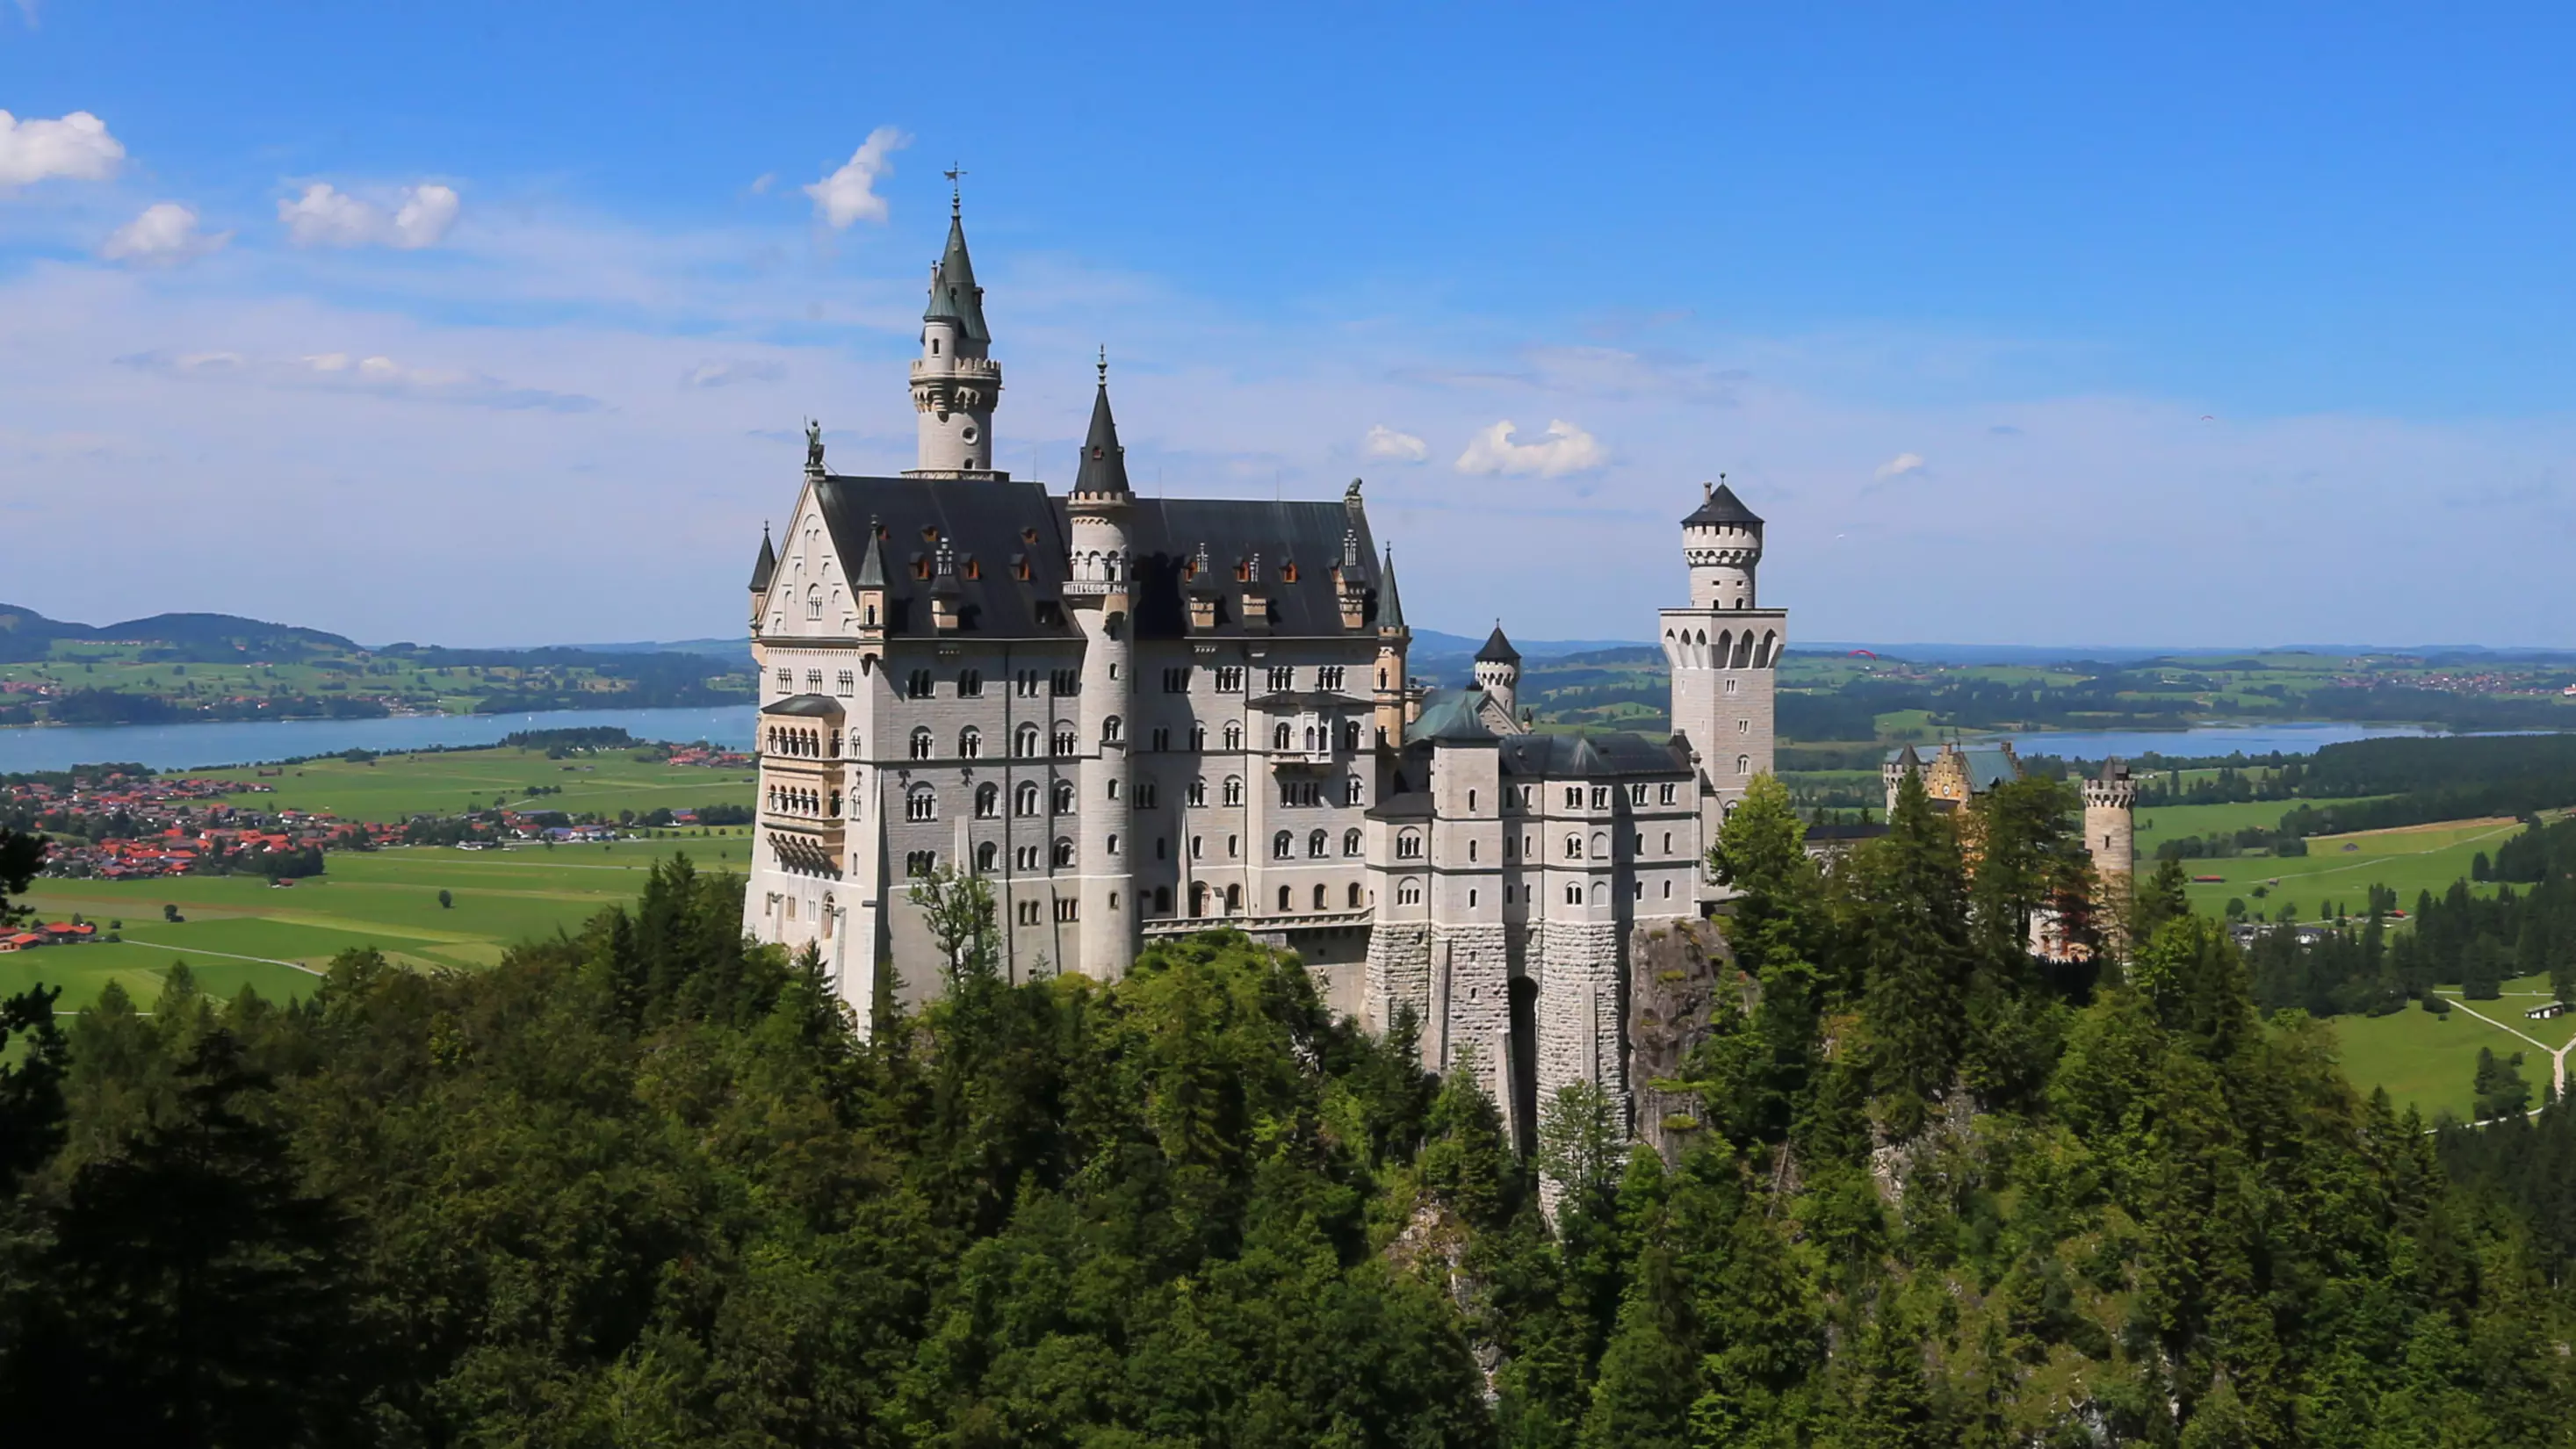 You Can Now Visit The Actual Disney Castle In Real Life